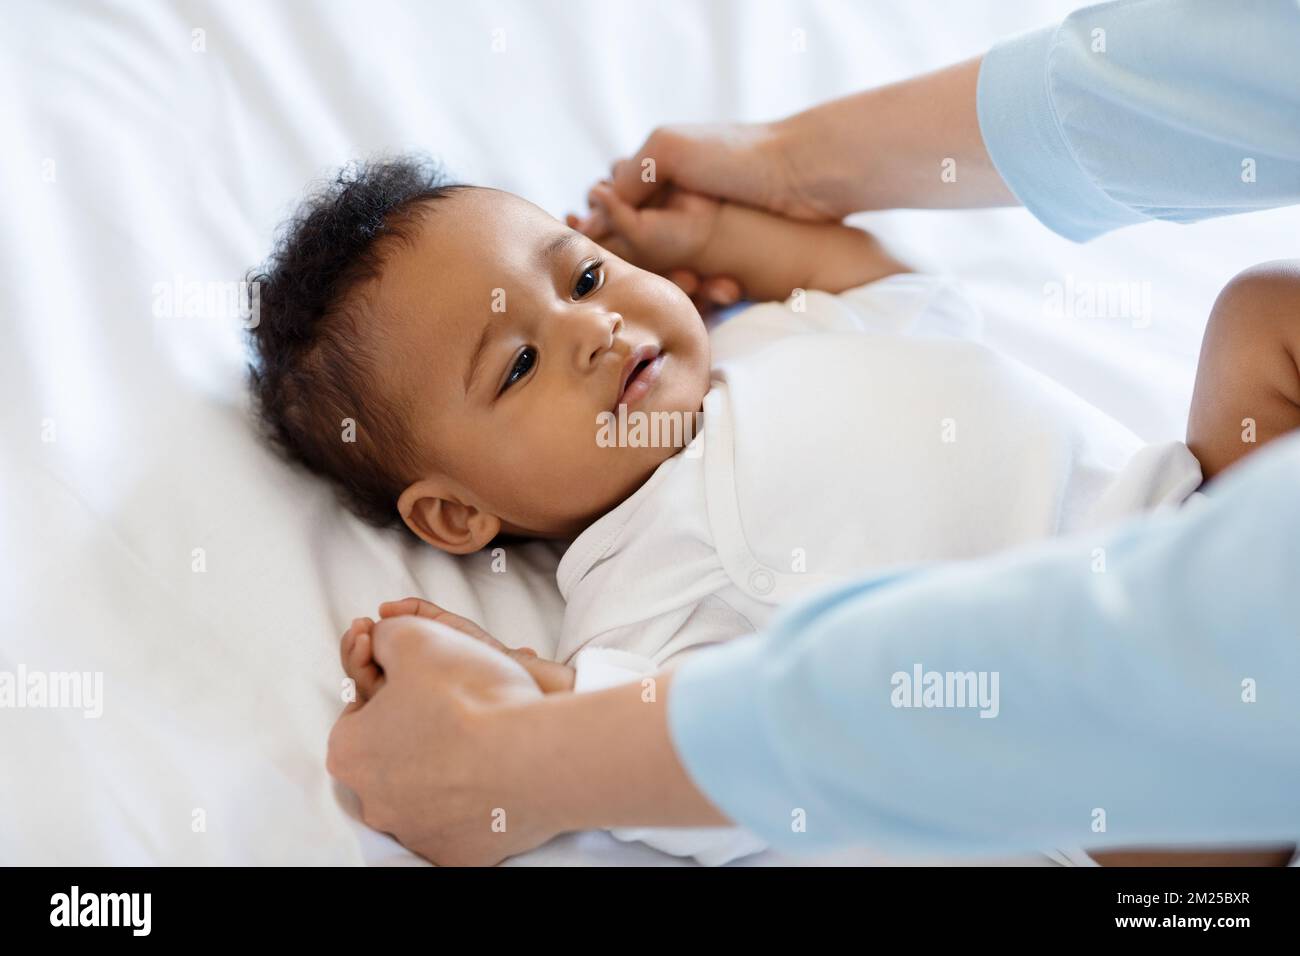 Unrecognizable Mother Making Gymnastics With Cute Little Black Baby Lying On Bed Stock Photo